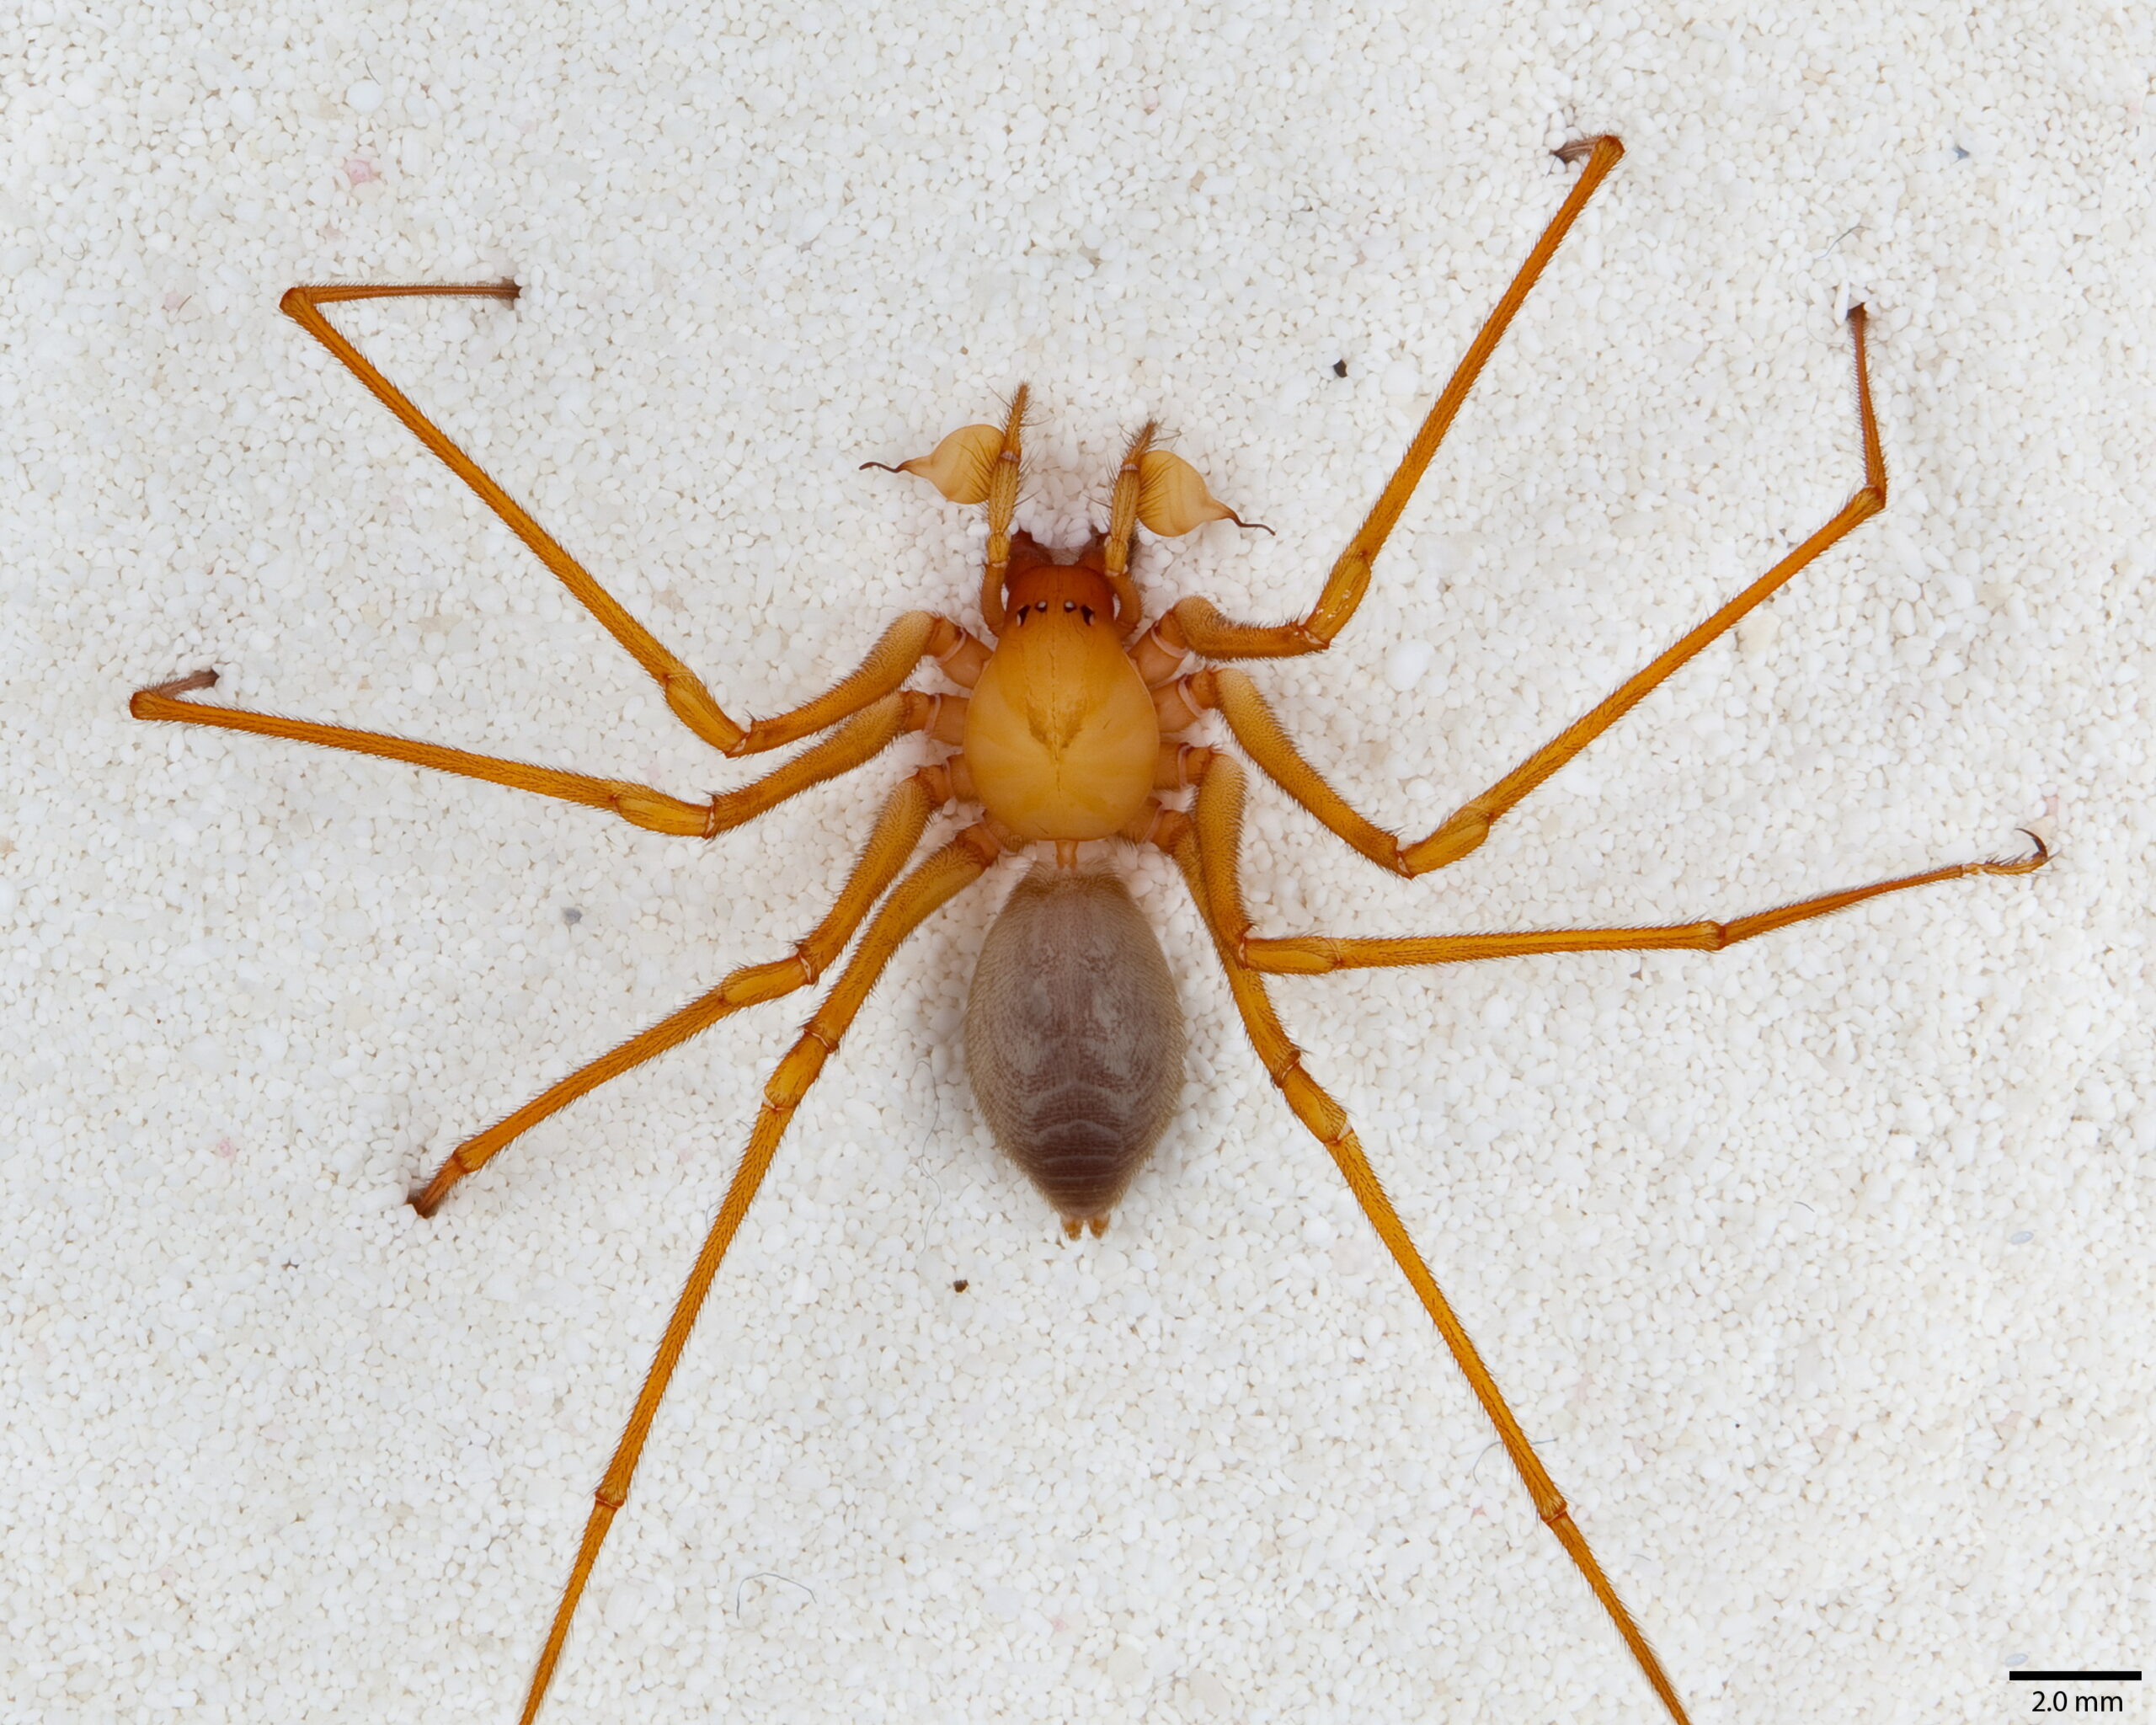 Giant Cave Spider Discovered in Oregon